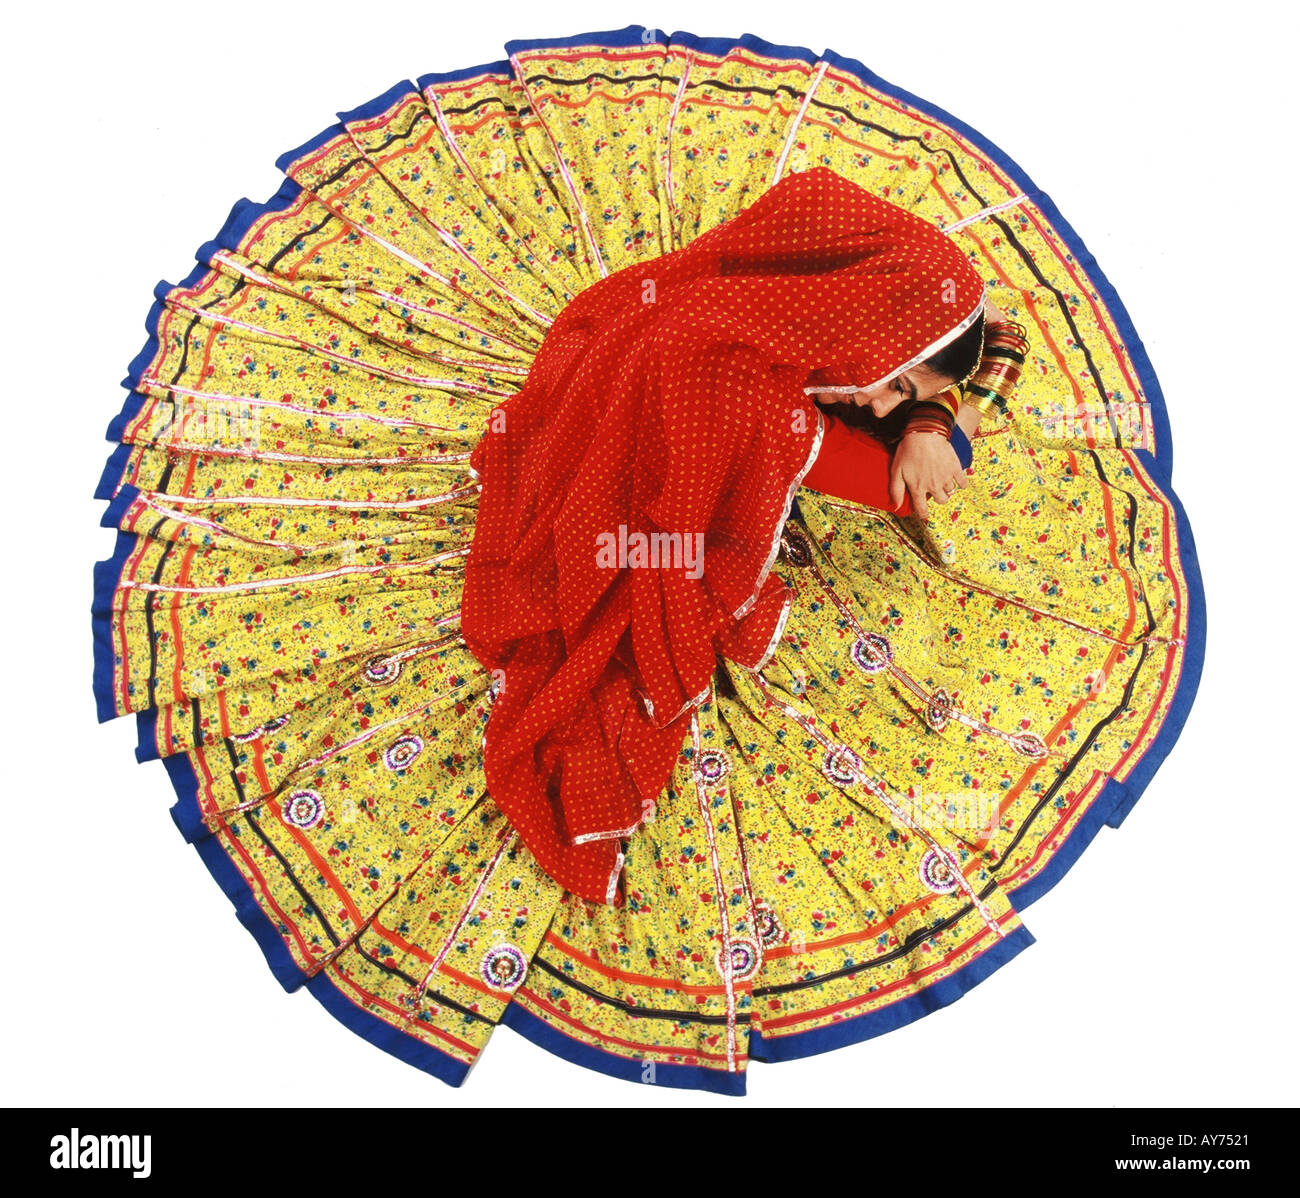 Single one top angle Indian Rajasthani Woman in circular round dress in yellow and red colour called Ghagara India Stock Photo